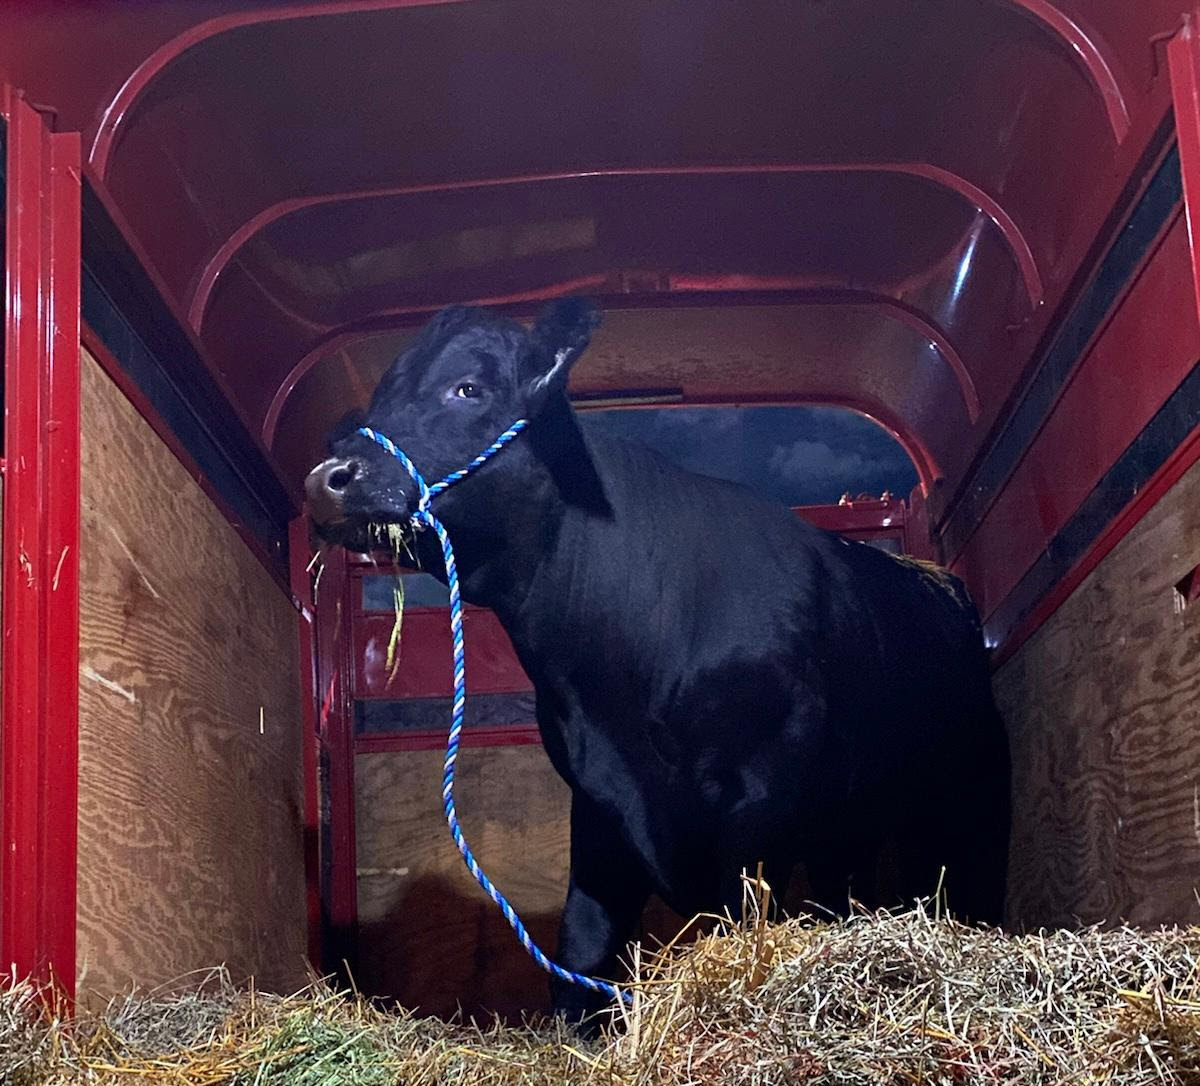 Barney the bull is safe and sound